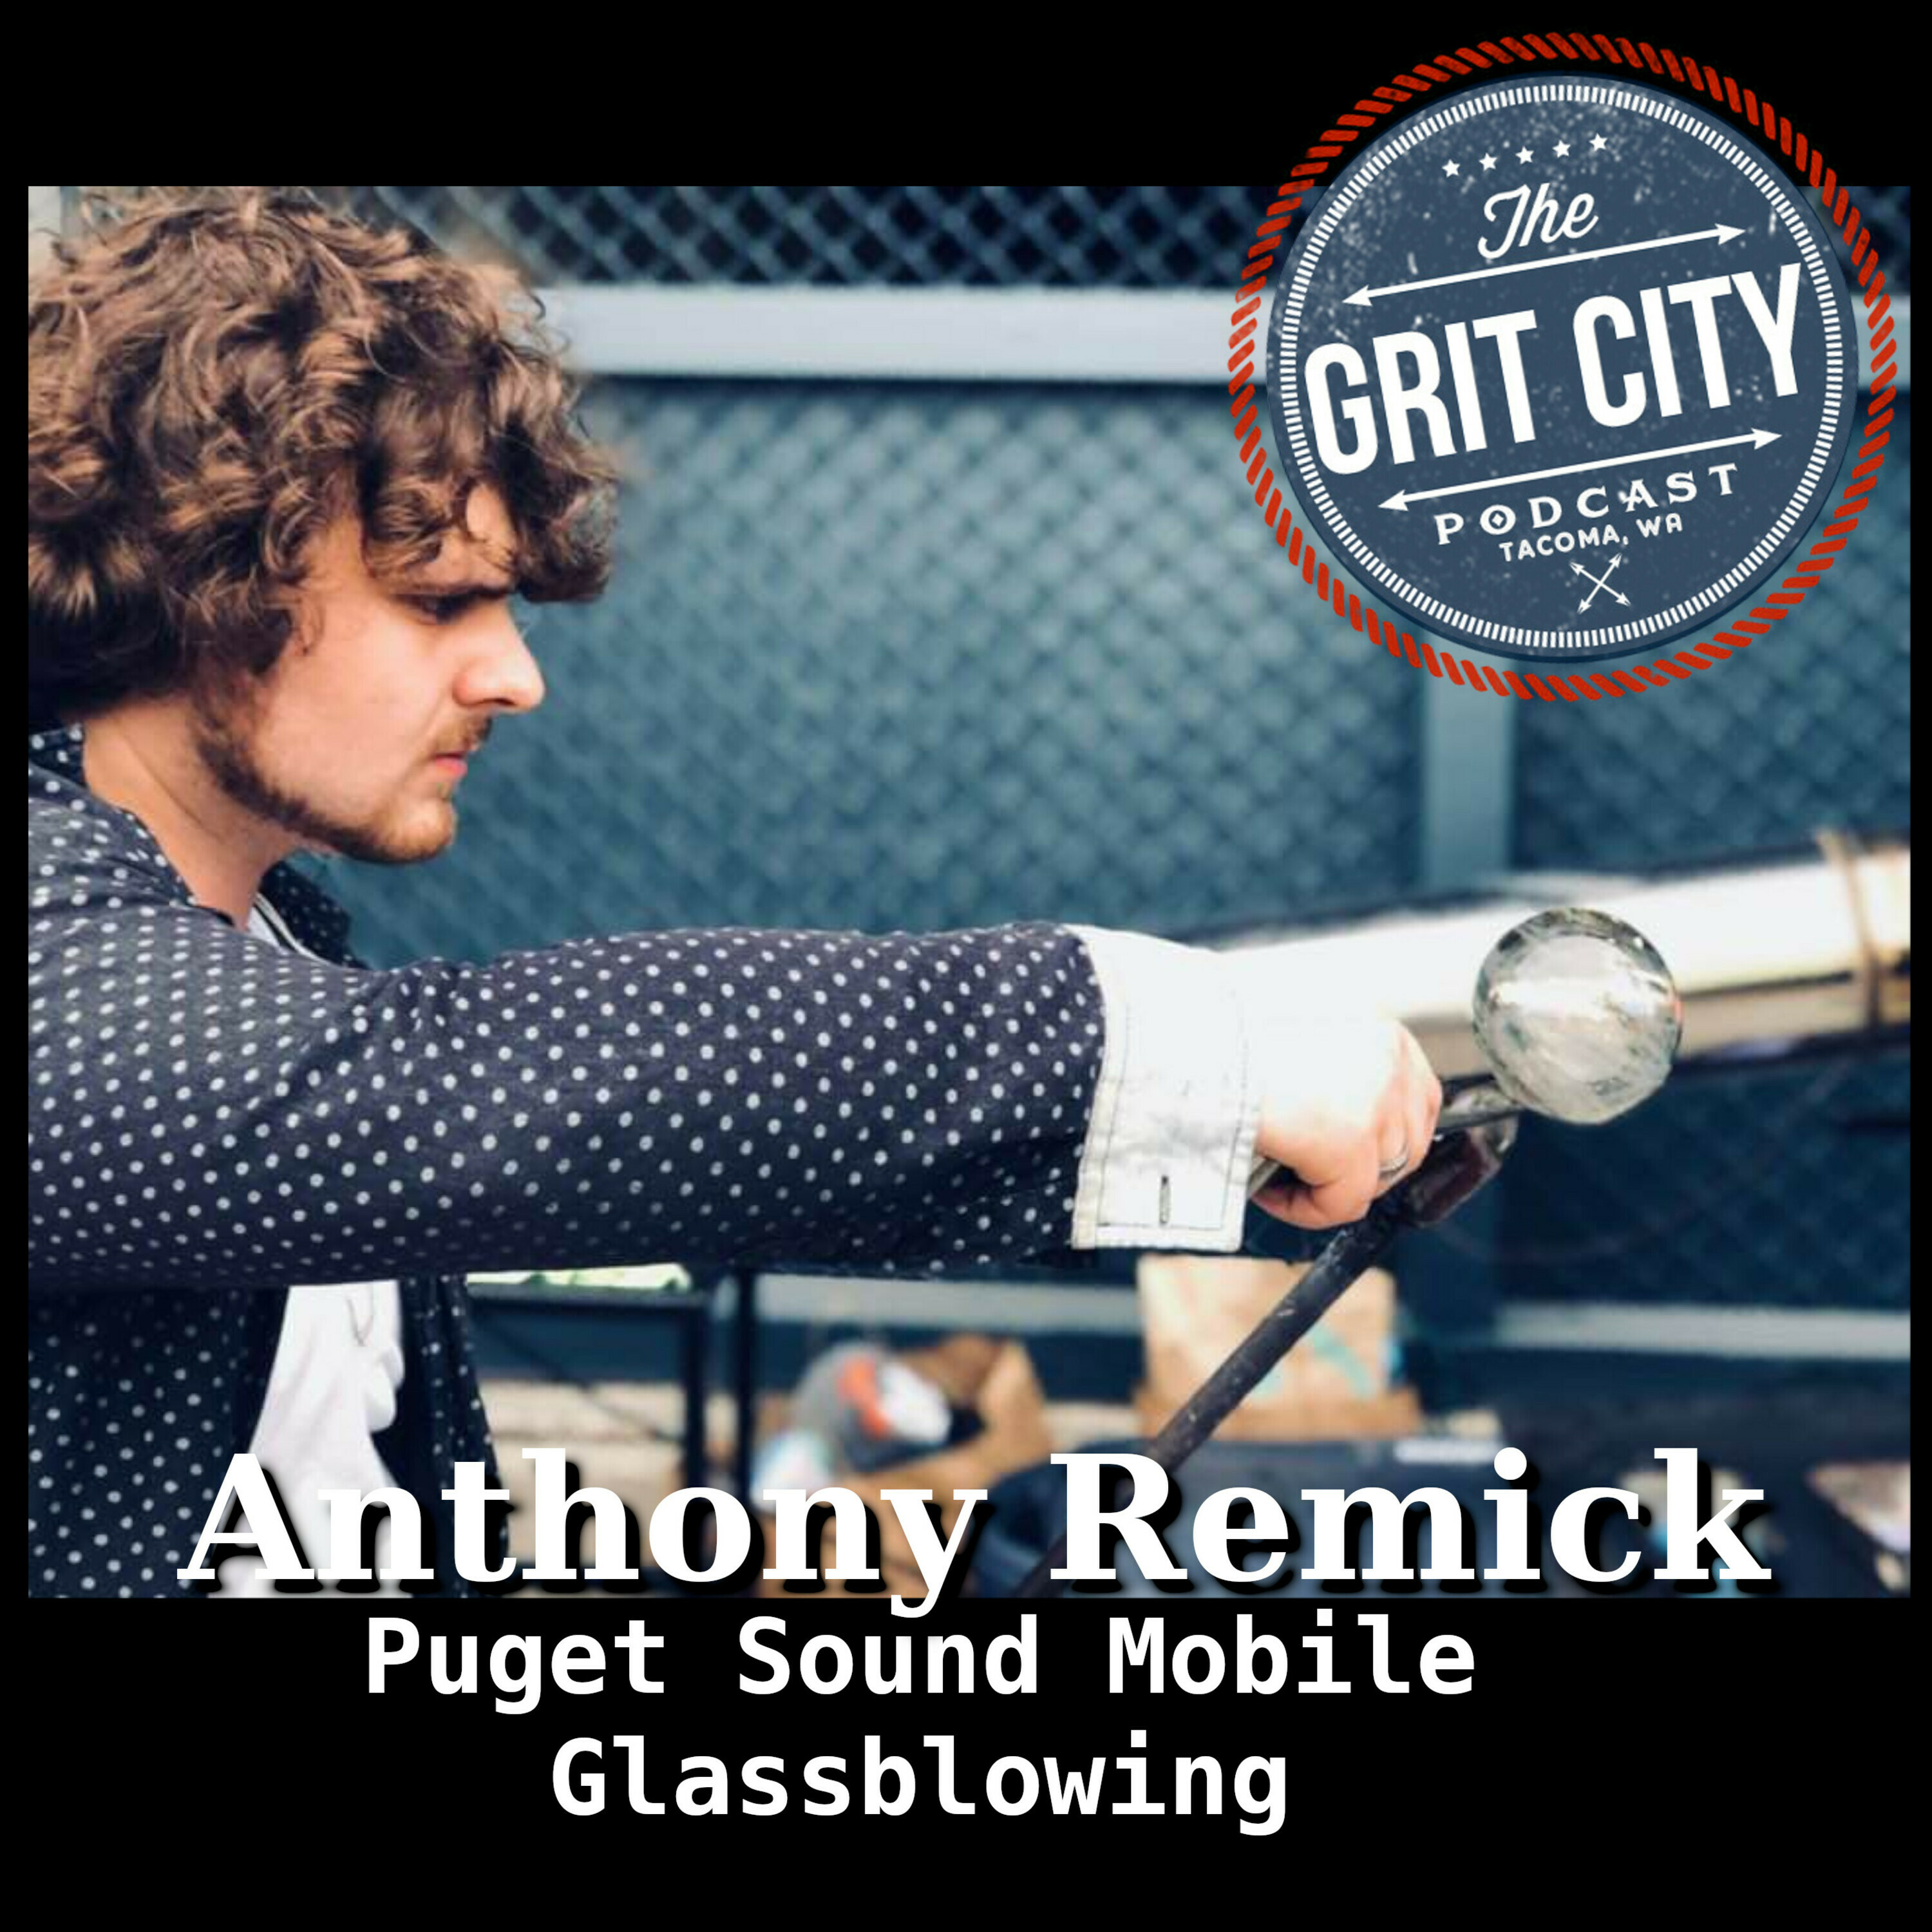 Anthony Remick - Puget Sound Mobile Glassblowing